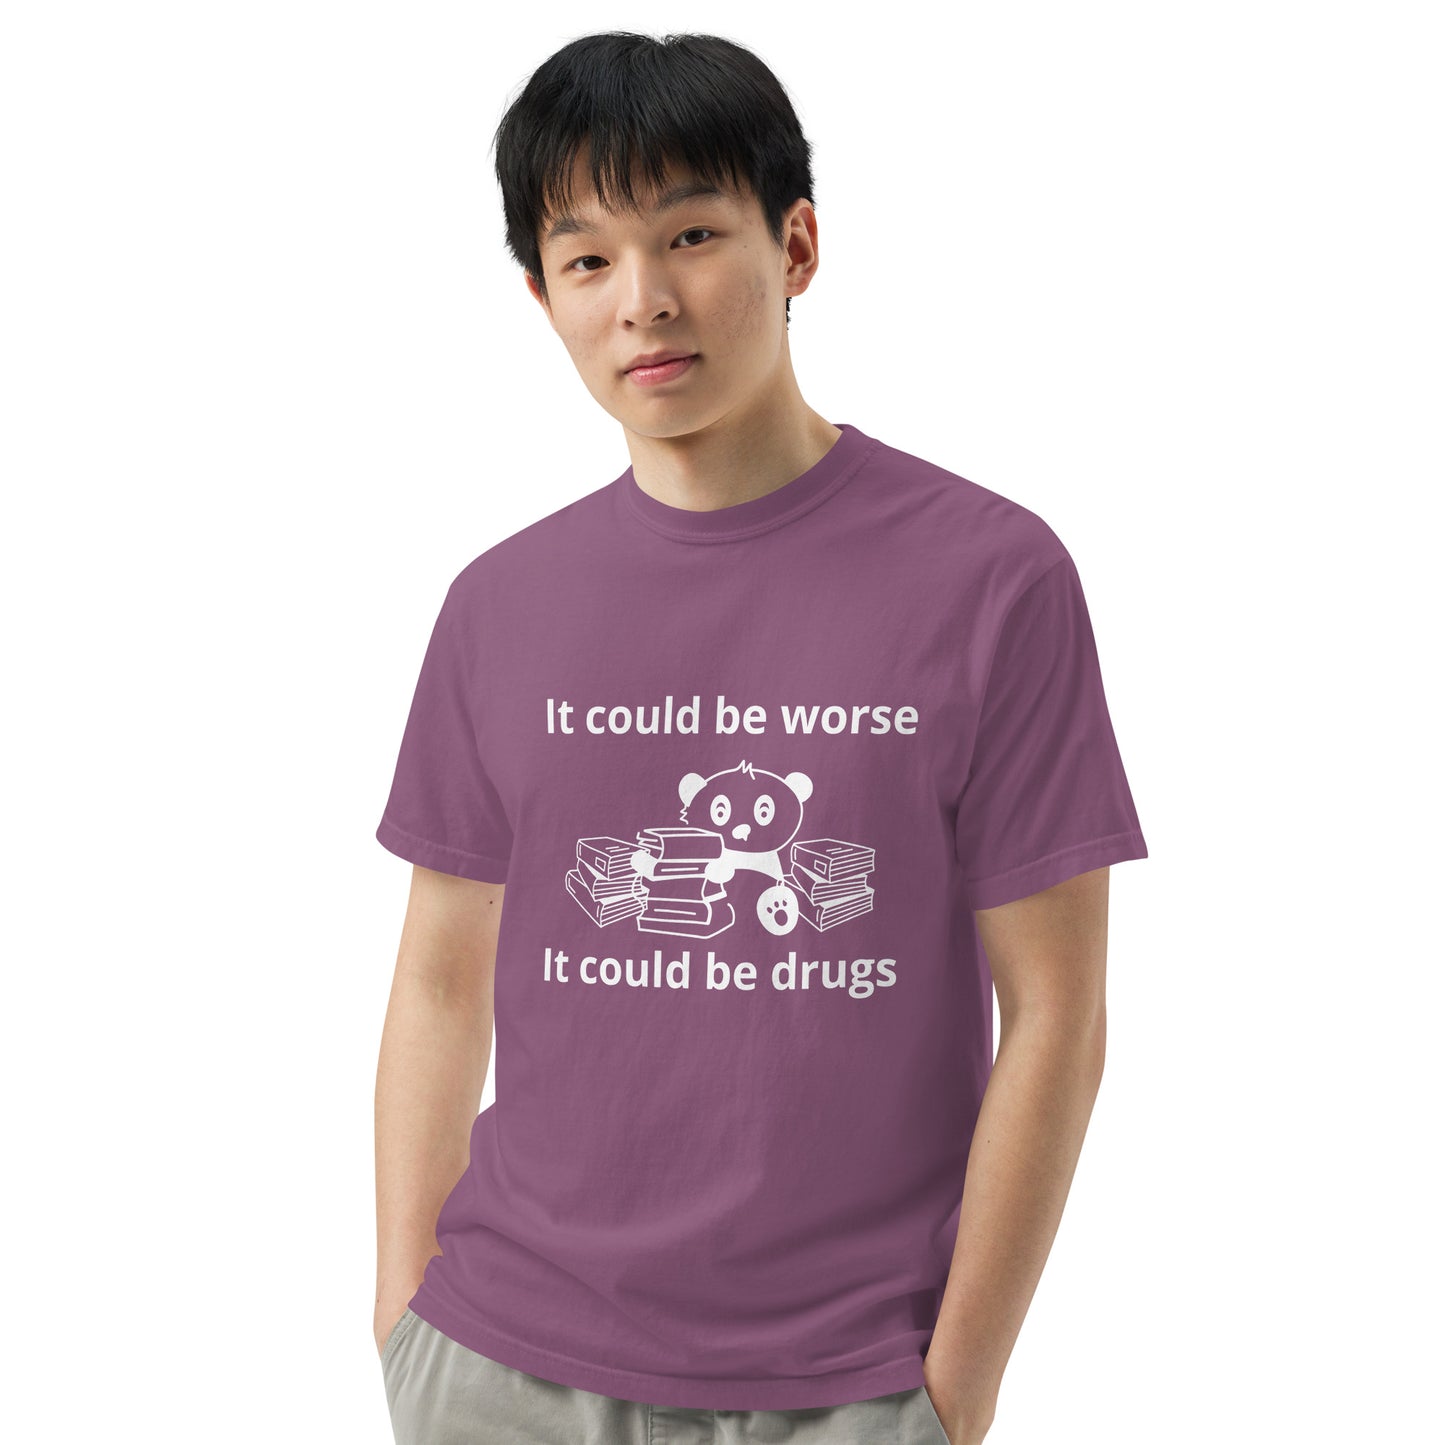 It could be worse Unisex garment-dyed heavyweight t-shirt